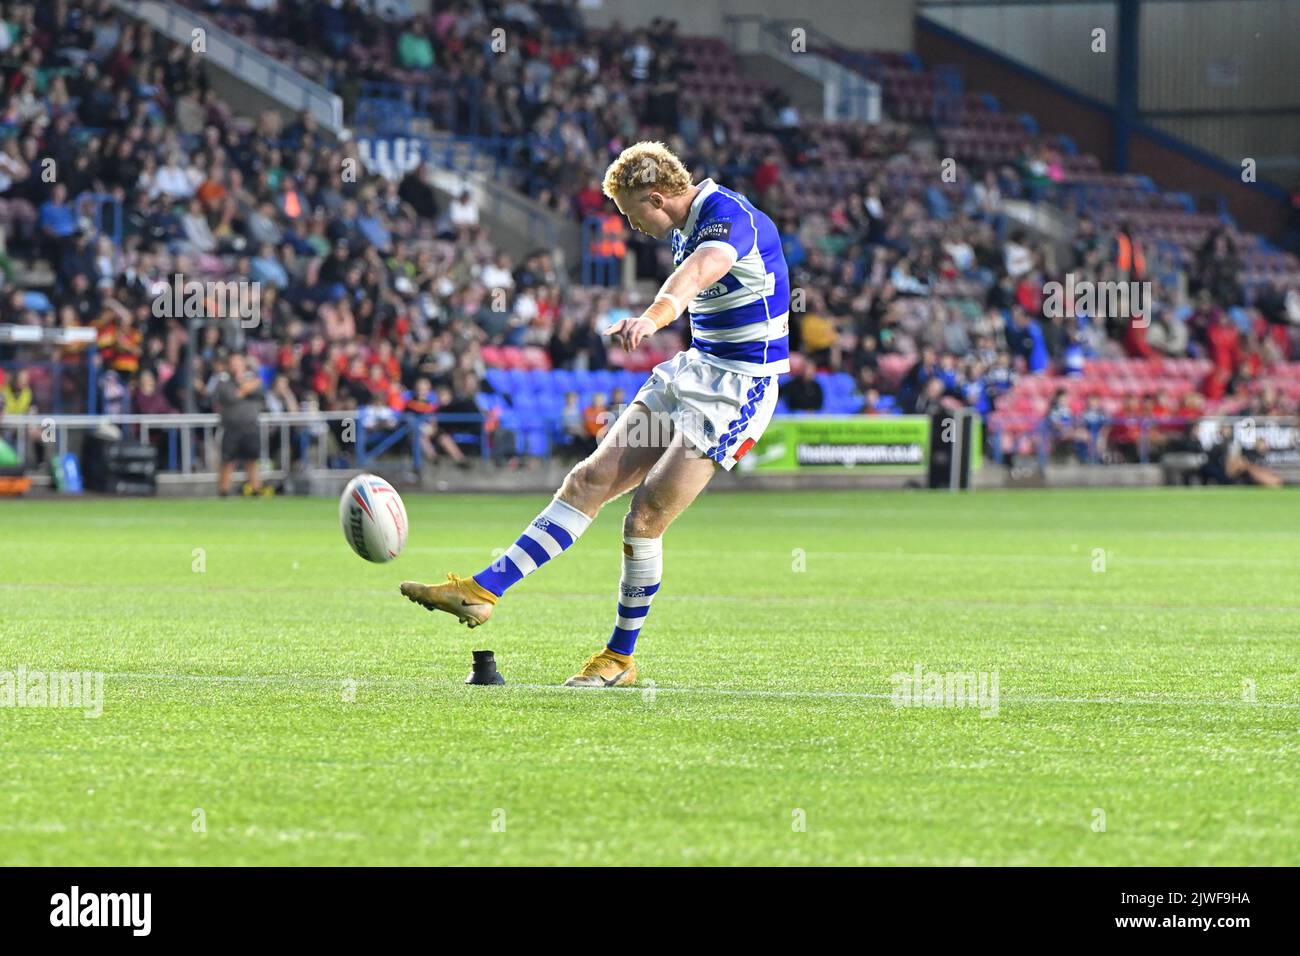 Stade DCBL, Widnes, Angleterre. 5th septembre 2022. Betfred Championship, Widnes Vikings versus Halifax Panthers; Walmsley convertit un match de championnat Try for Halifax, Betfred entre Widnes Vikings et Halifax Panthers crédit: Mark Percy/Alamy Live News crédit: MARK PERCY/Alamy Live News Banque D'Images